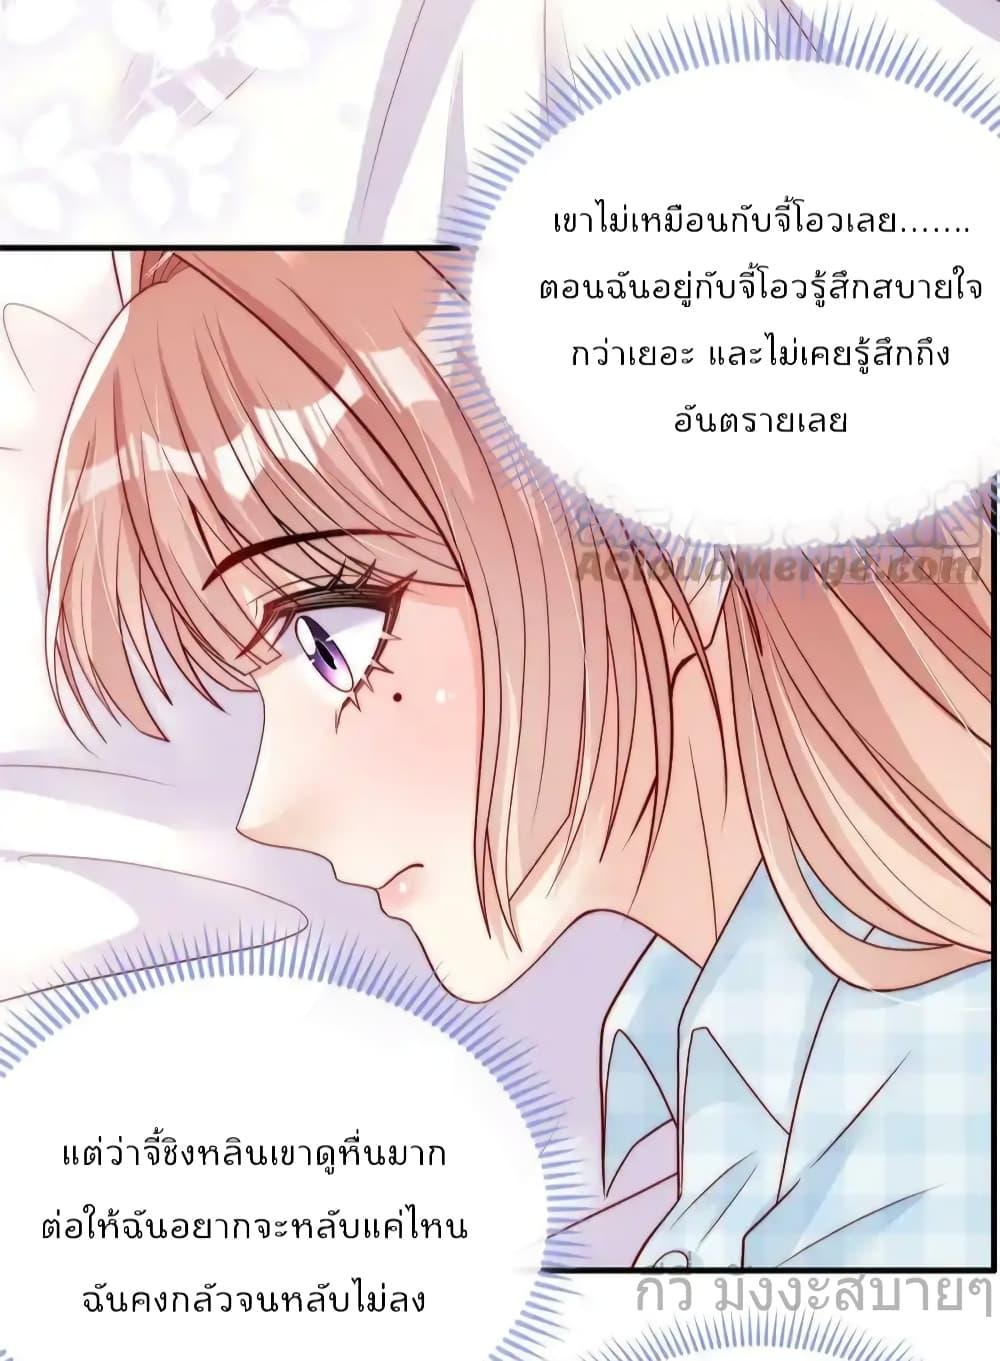 Find Me In Your Meory ตอนที่ 97 (22)